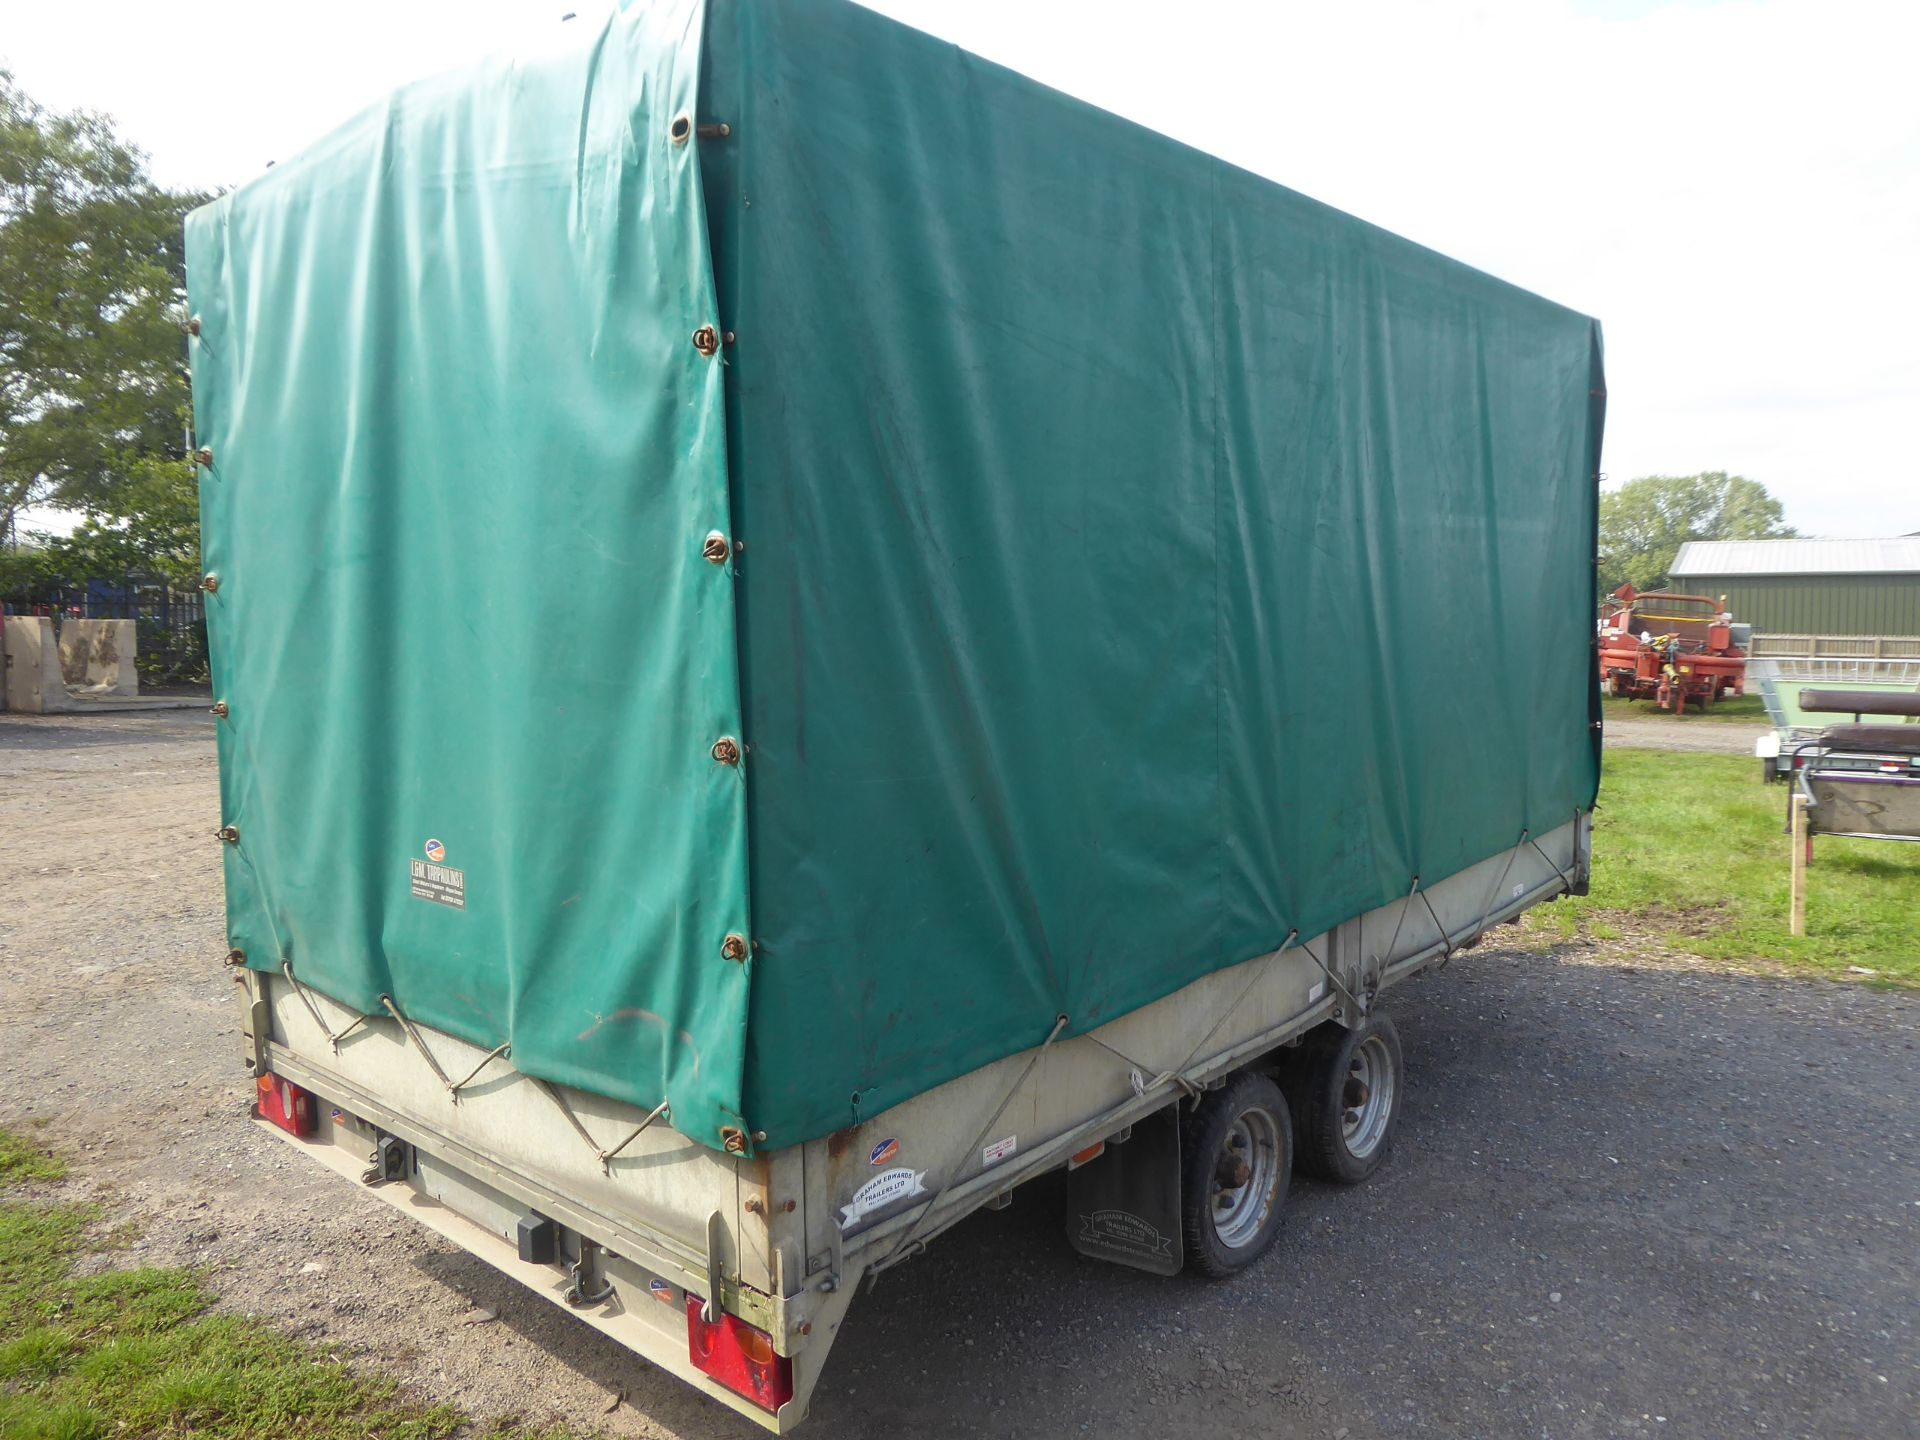 Graham Edwards 2014 14' x 7' wide 31/2 ton trailer c/w canvas cover - Image 3 of 3